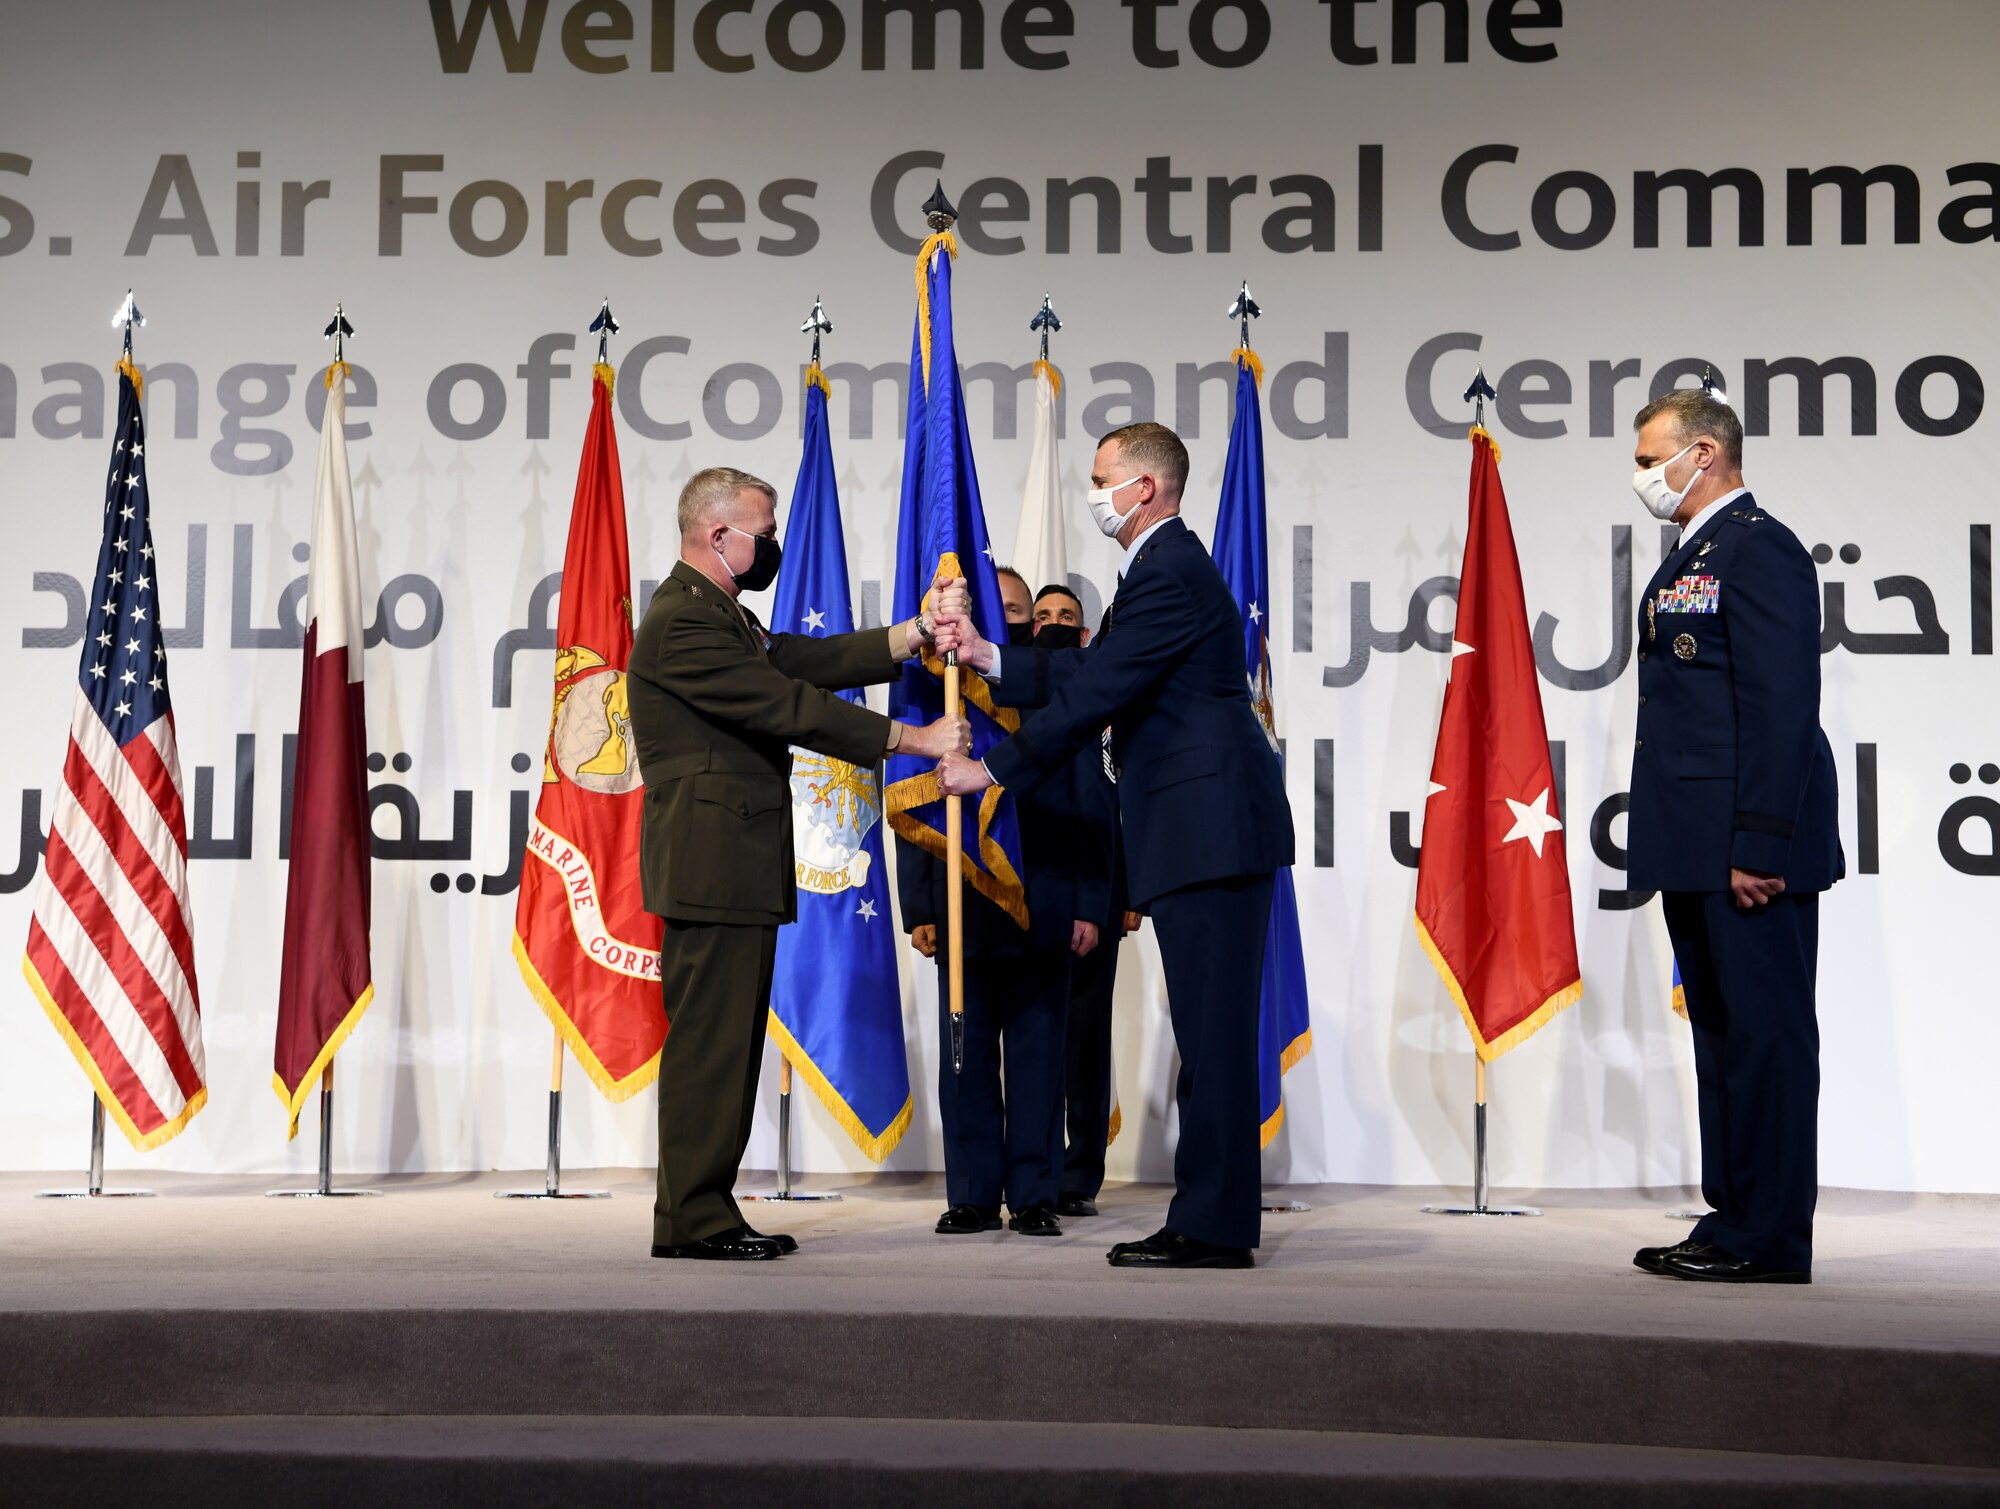 U.S. Air Force Lt. Gen. Gregory Guillot, incoming commander of U.S. Air Forces Central Command, accepts command from U.S. Marine Corps Gen. Kenneth McKenzie, commander of U.S. Central Command, during a change of command ceremony at Al Udeid Air Base, Qatar, July 16, 2020.